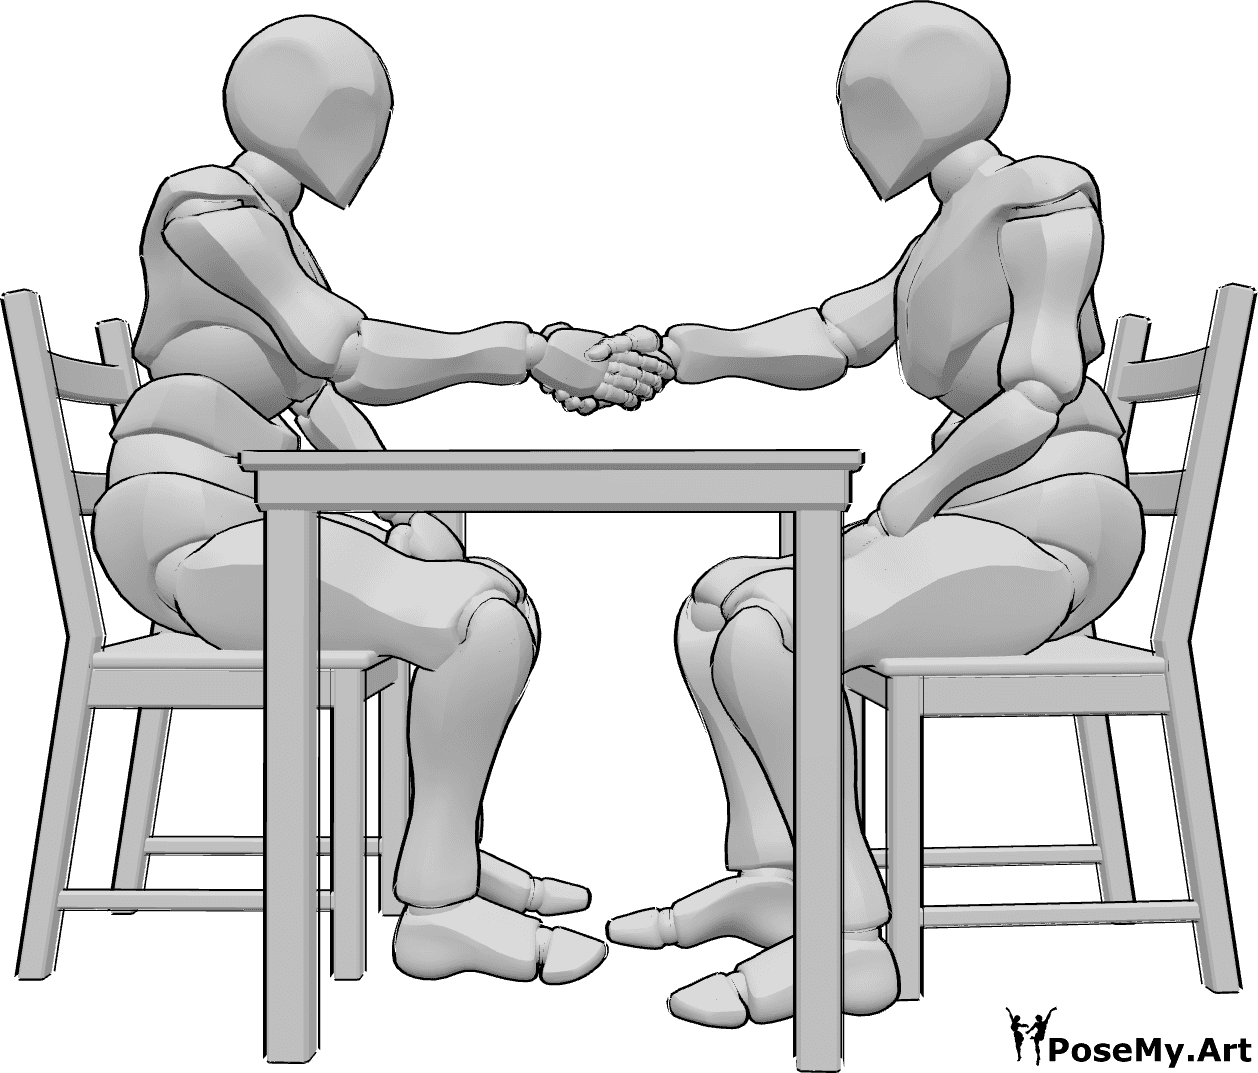 Pose Reference- Male sitting handshake pose - Two males are sitting at a table in front of each other and shaking hands